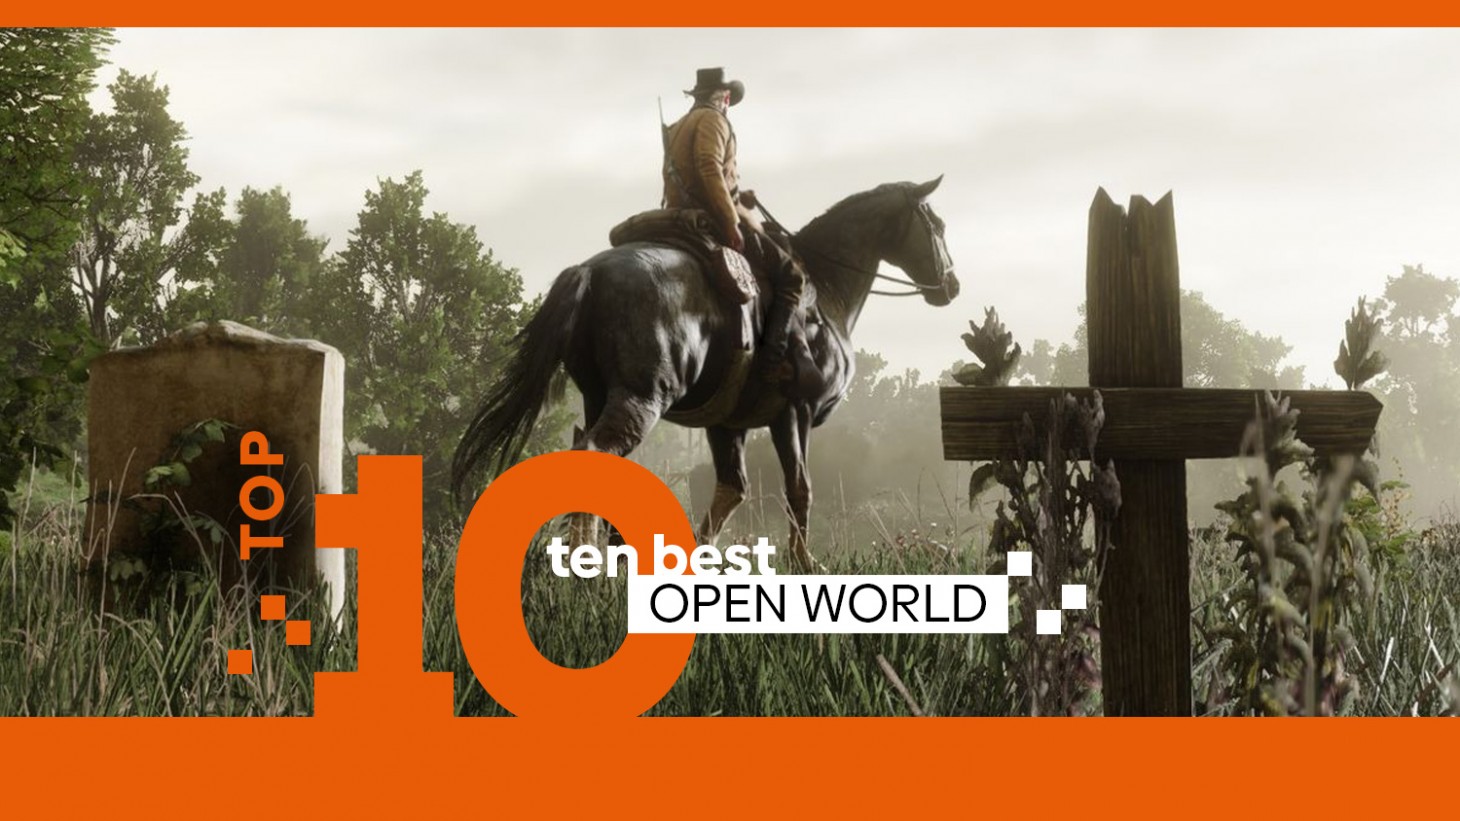 Top 15 Best PC Open World RPG Games That You Should Play